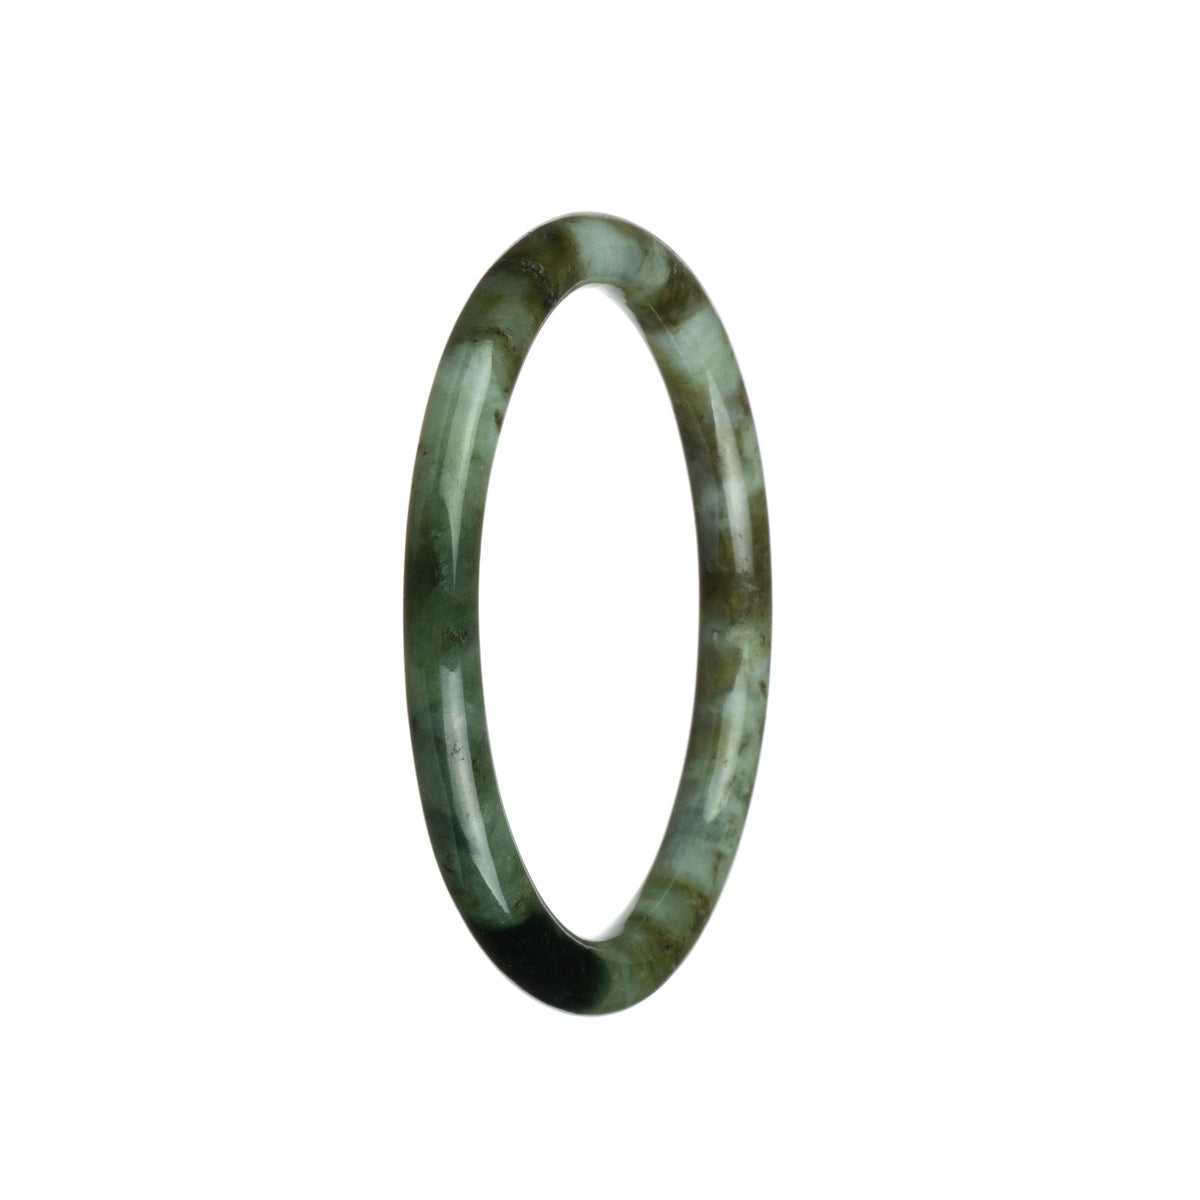 A bracelet made of genuine natural Burma Jade with a beautiful green, brown, and white pattern. The bracelet is petite round in shape, measuring 61mm. Sold by MAYS.